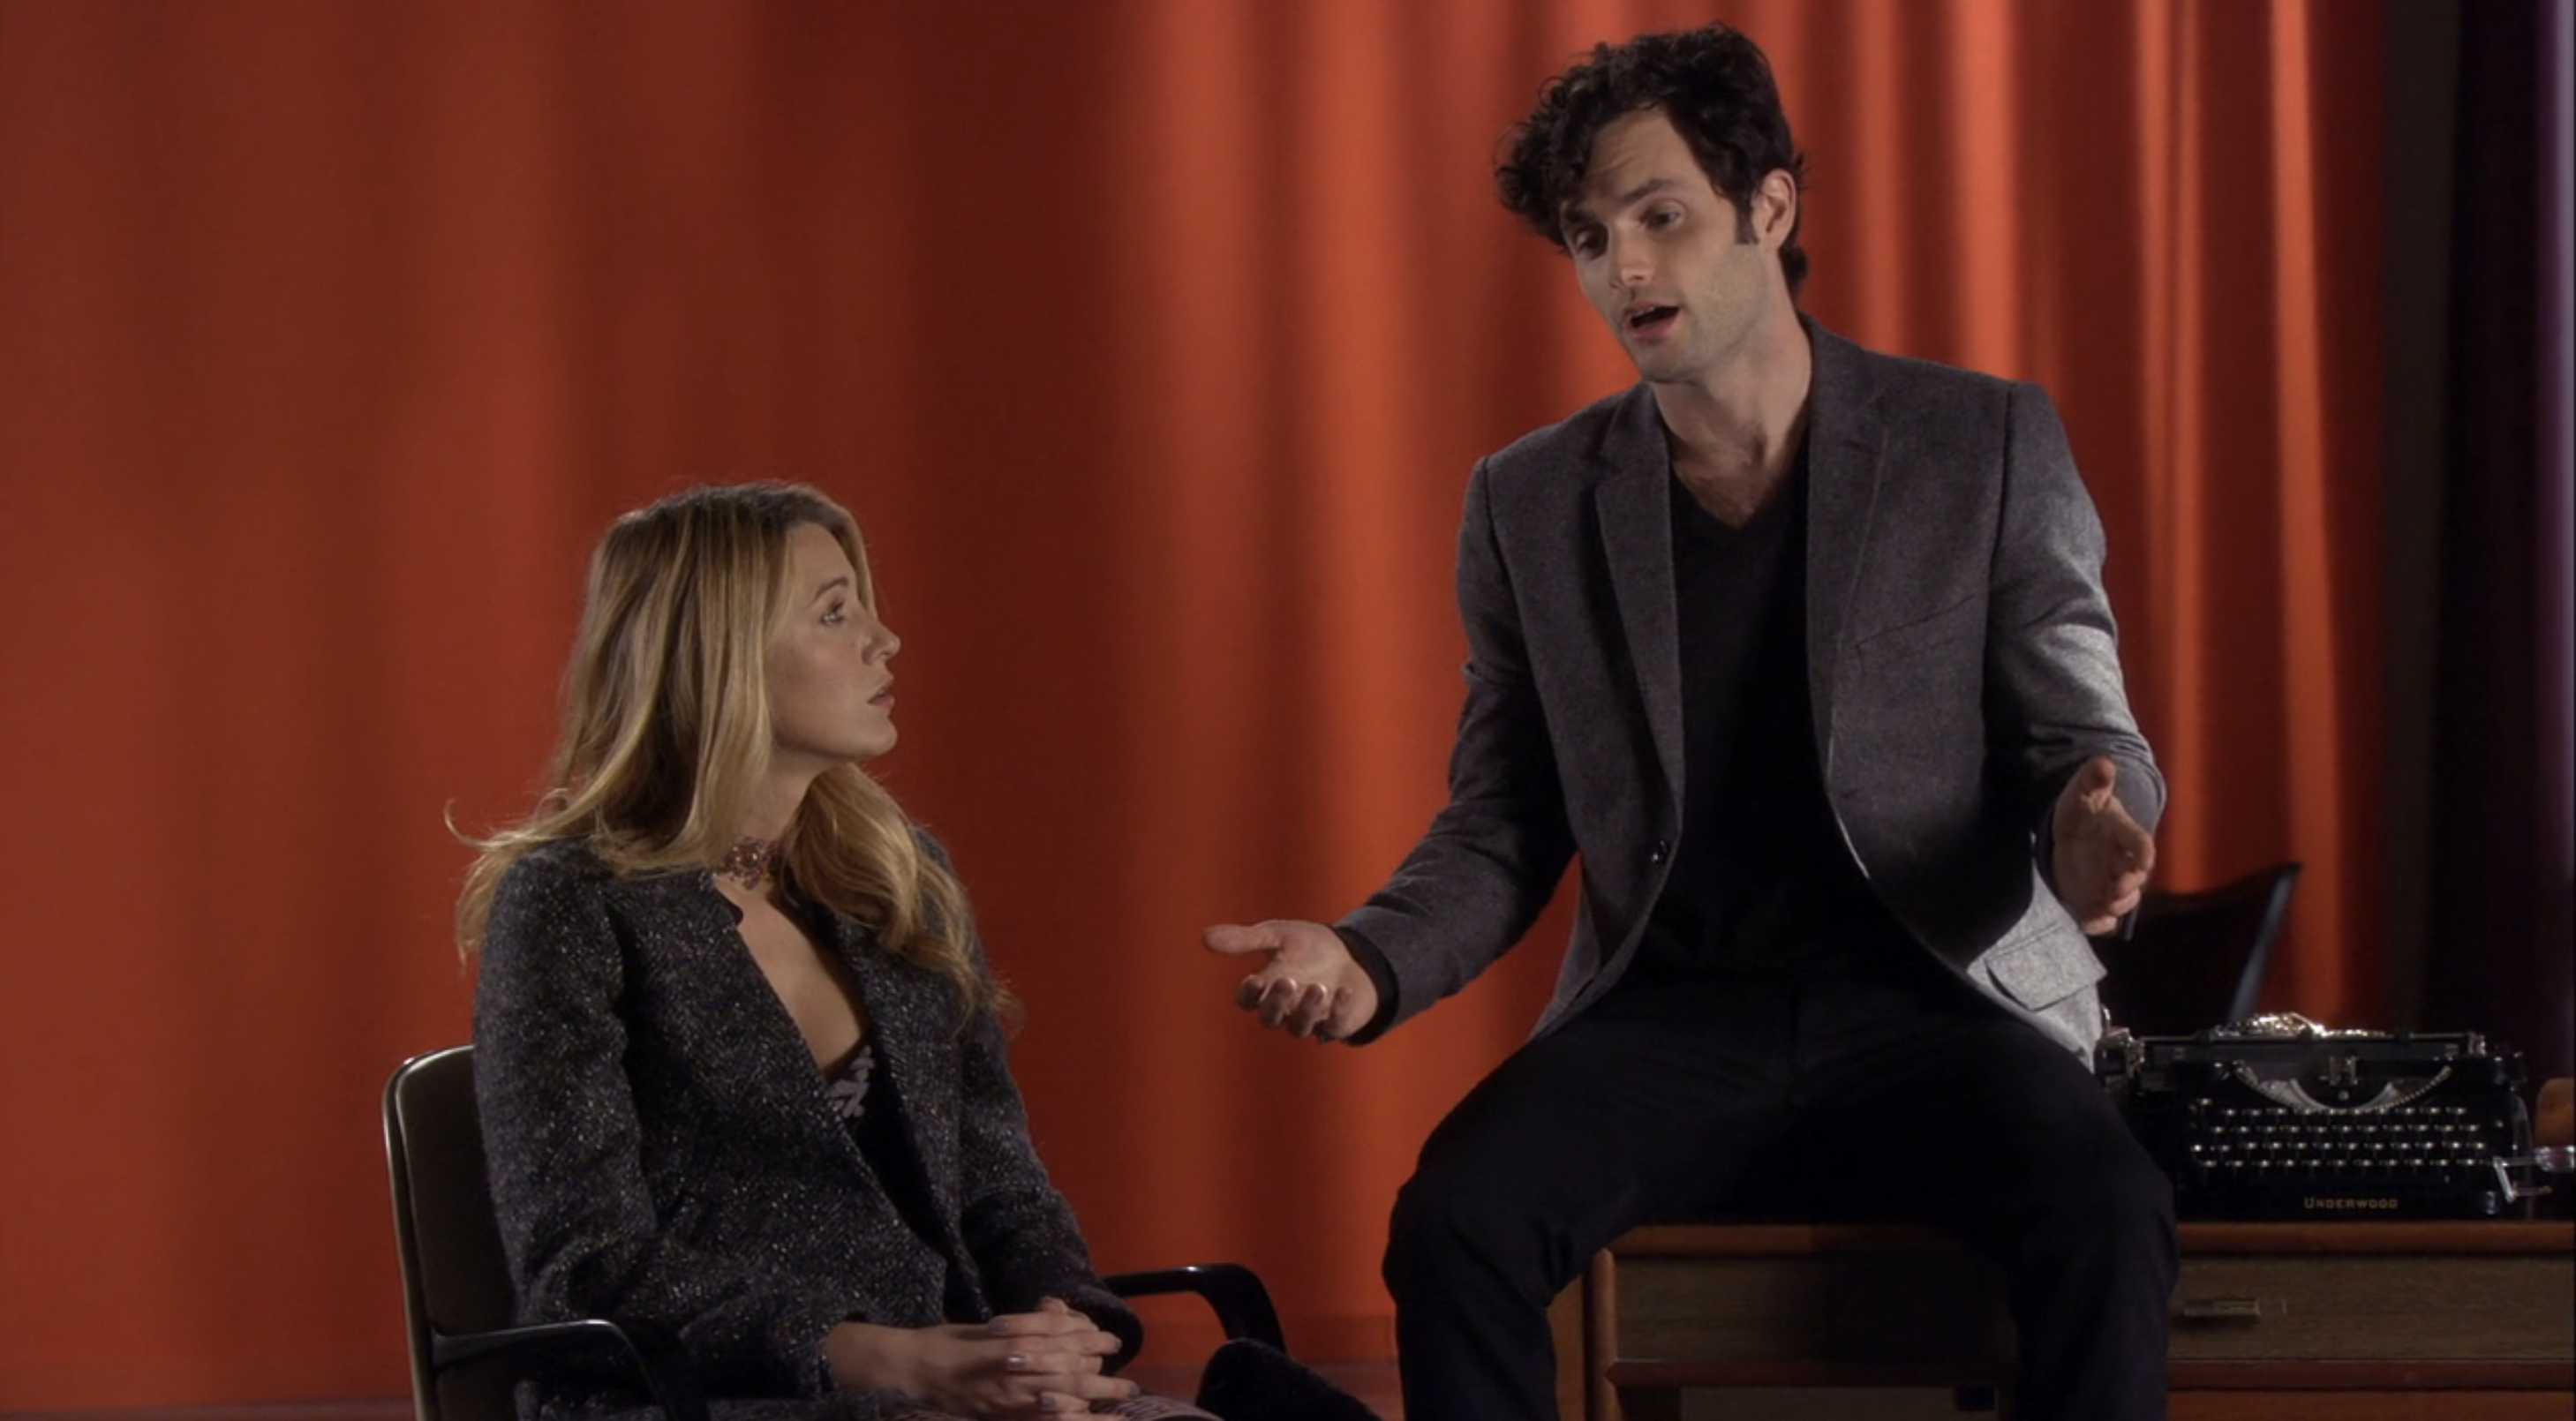 Blake Lively and Penn Badgley sitting and talking in a scene